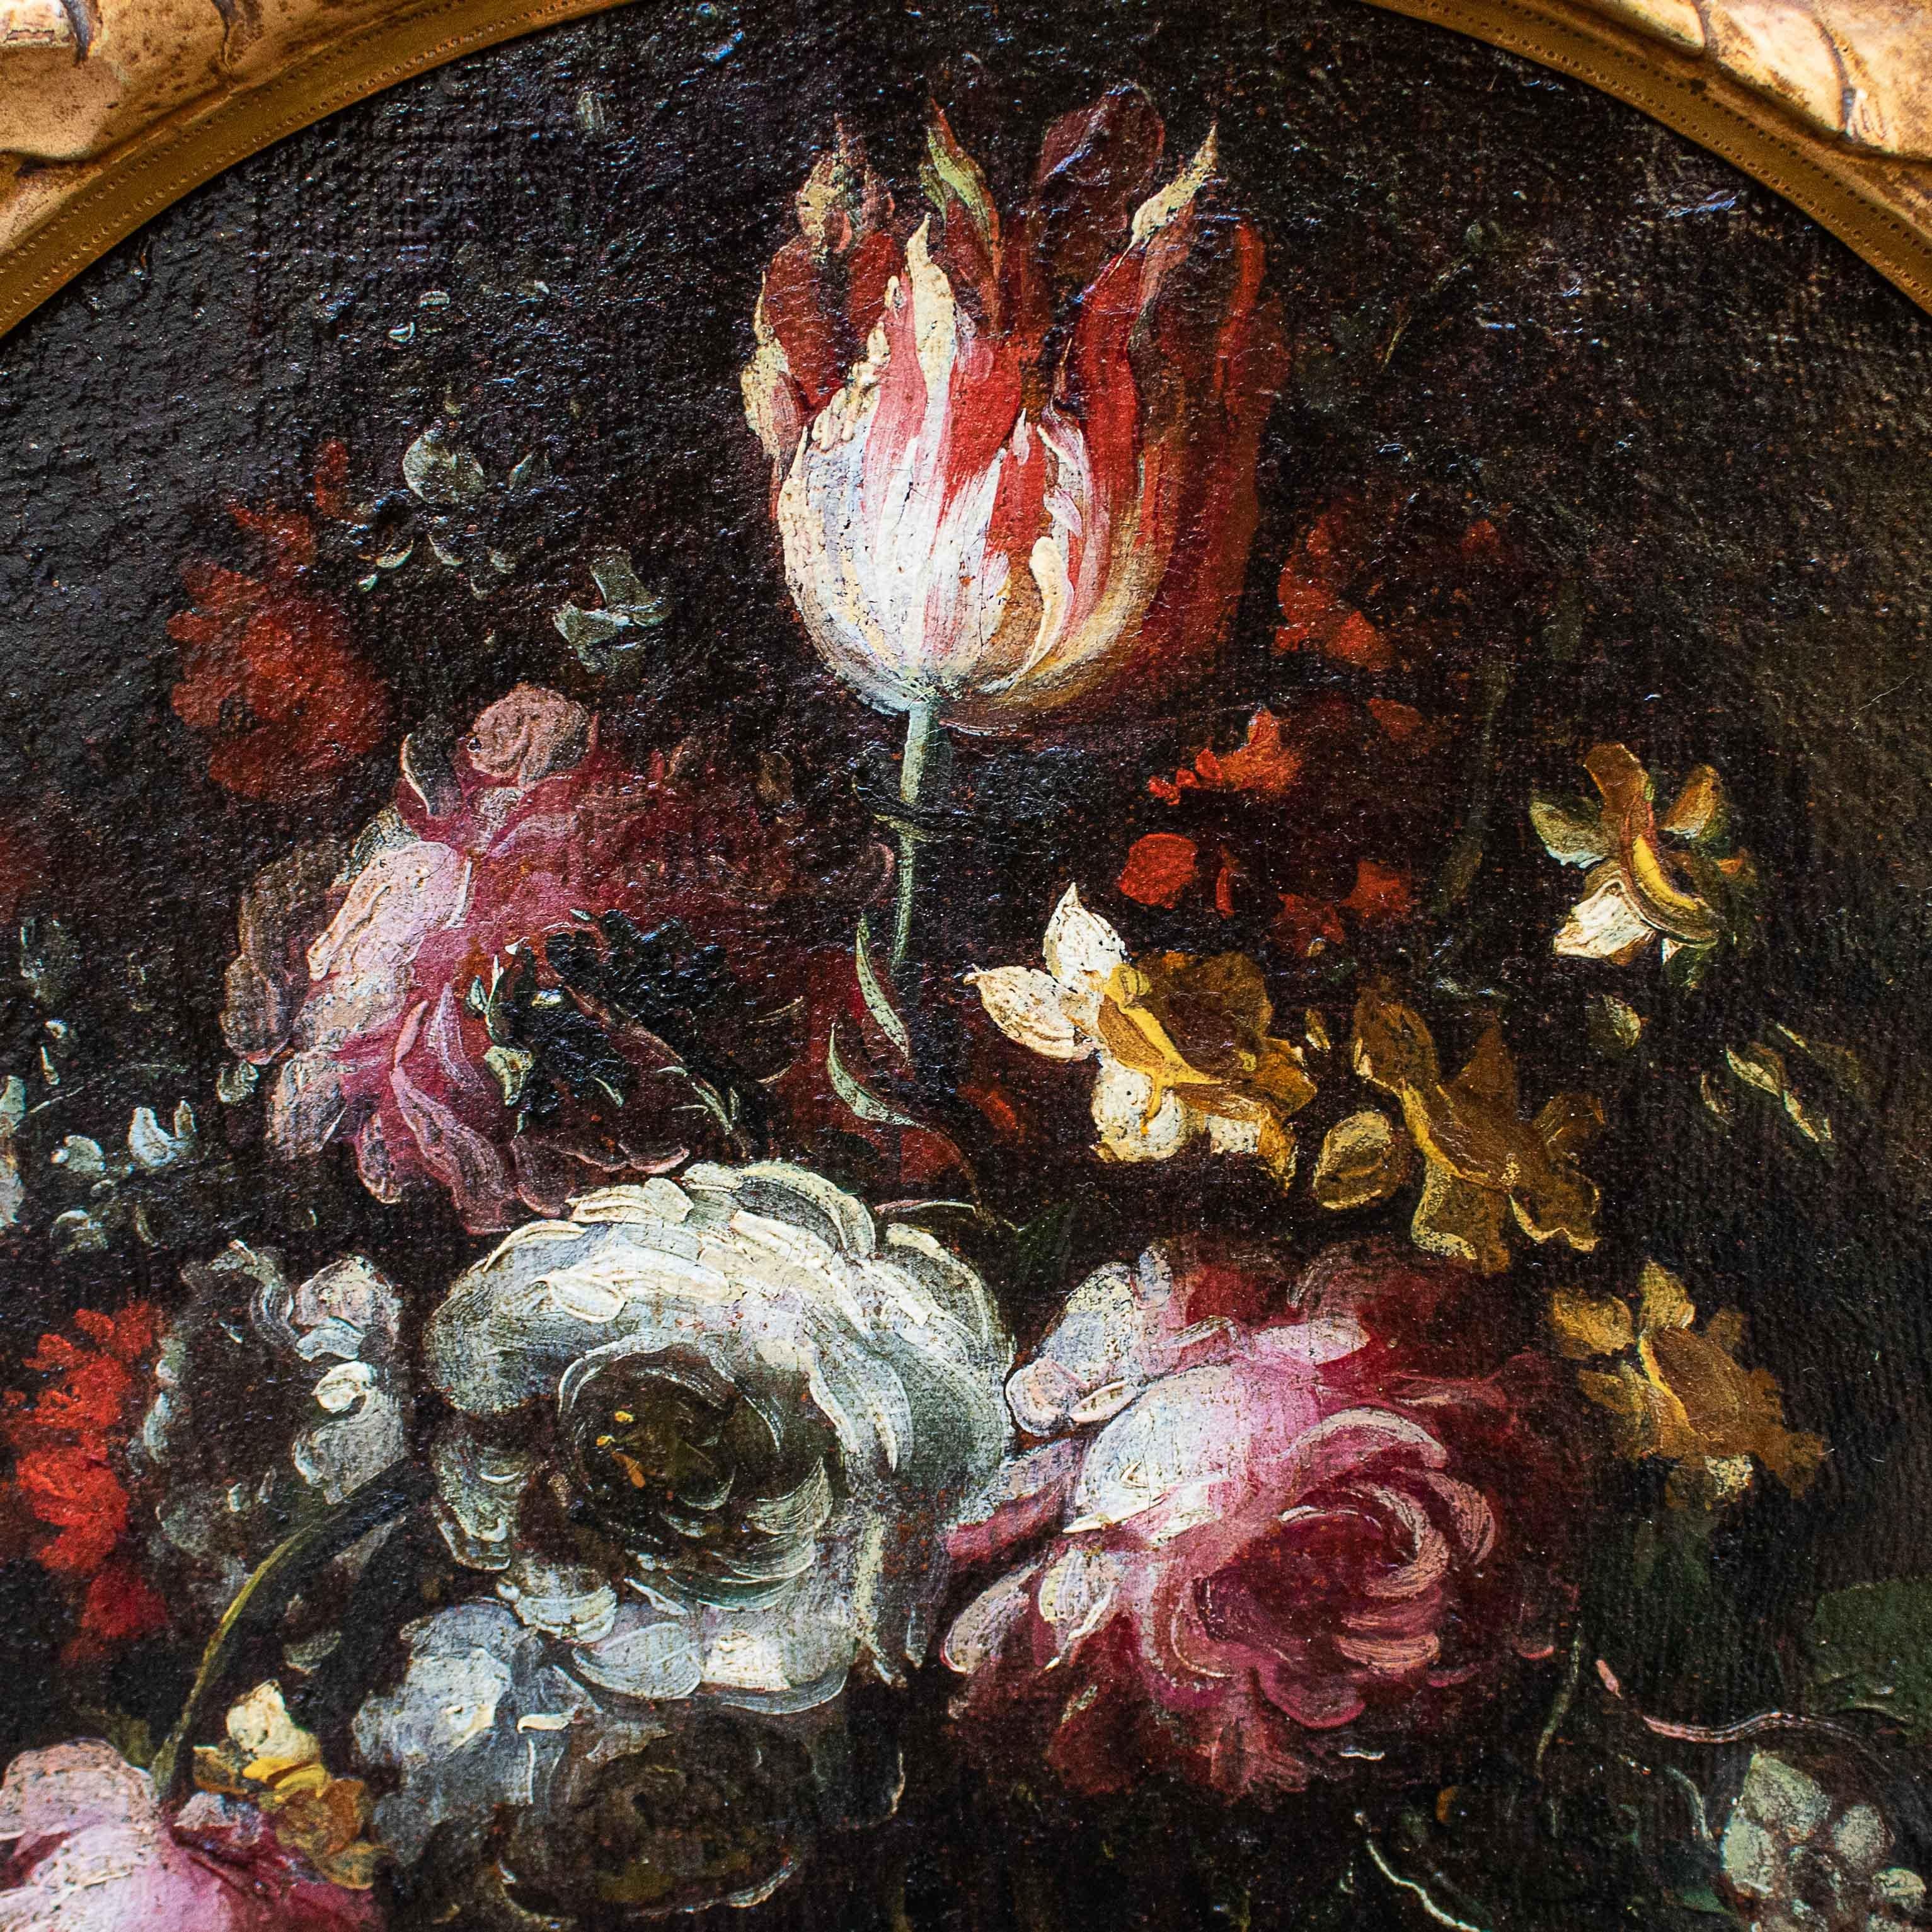 17th Century Still Lifes with Flowers Paintings Oil on Canvas 1